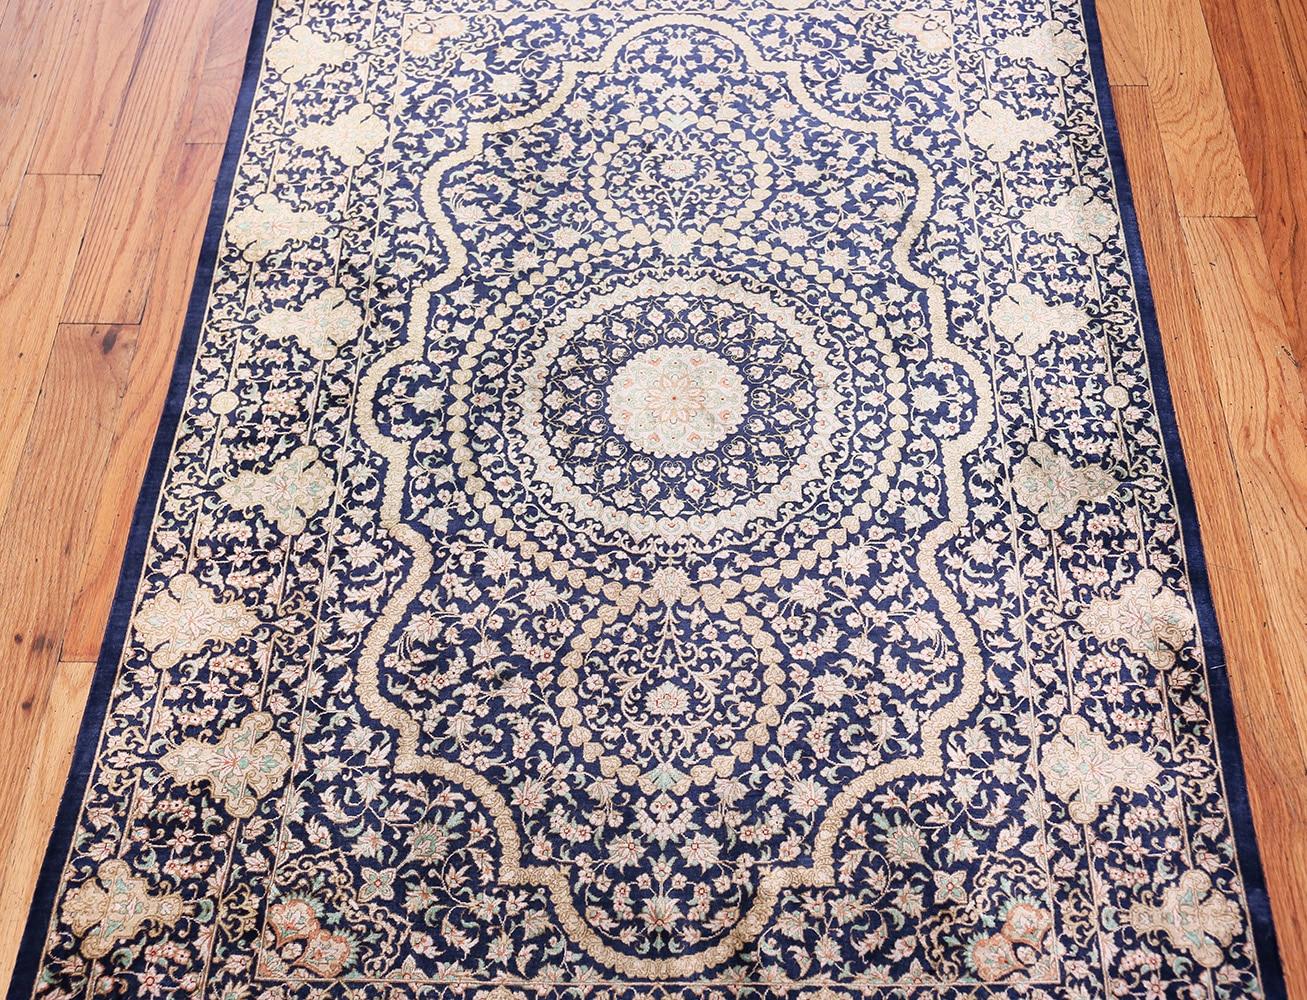 A beautiful and finely woven blue background color vintage Persian silk Qum rug, country of origin / rug type: Persian rug, date: circa vintage mid-20th century - Size: 3 ft 3 in x 4 ft 10 in (0.99 m x 1.47 m).